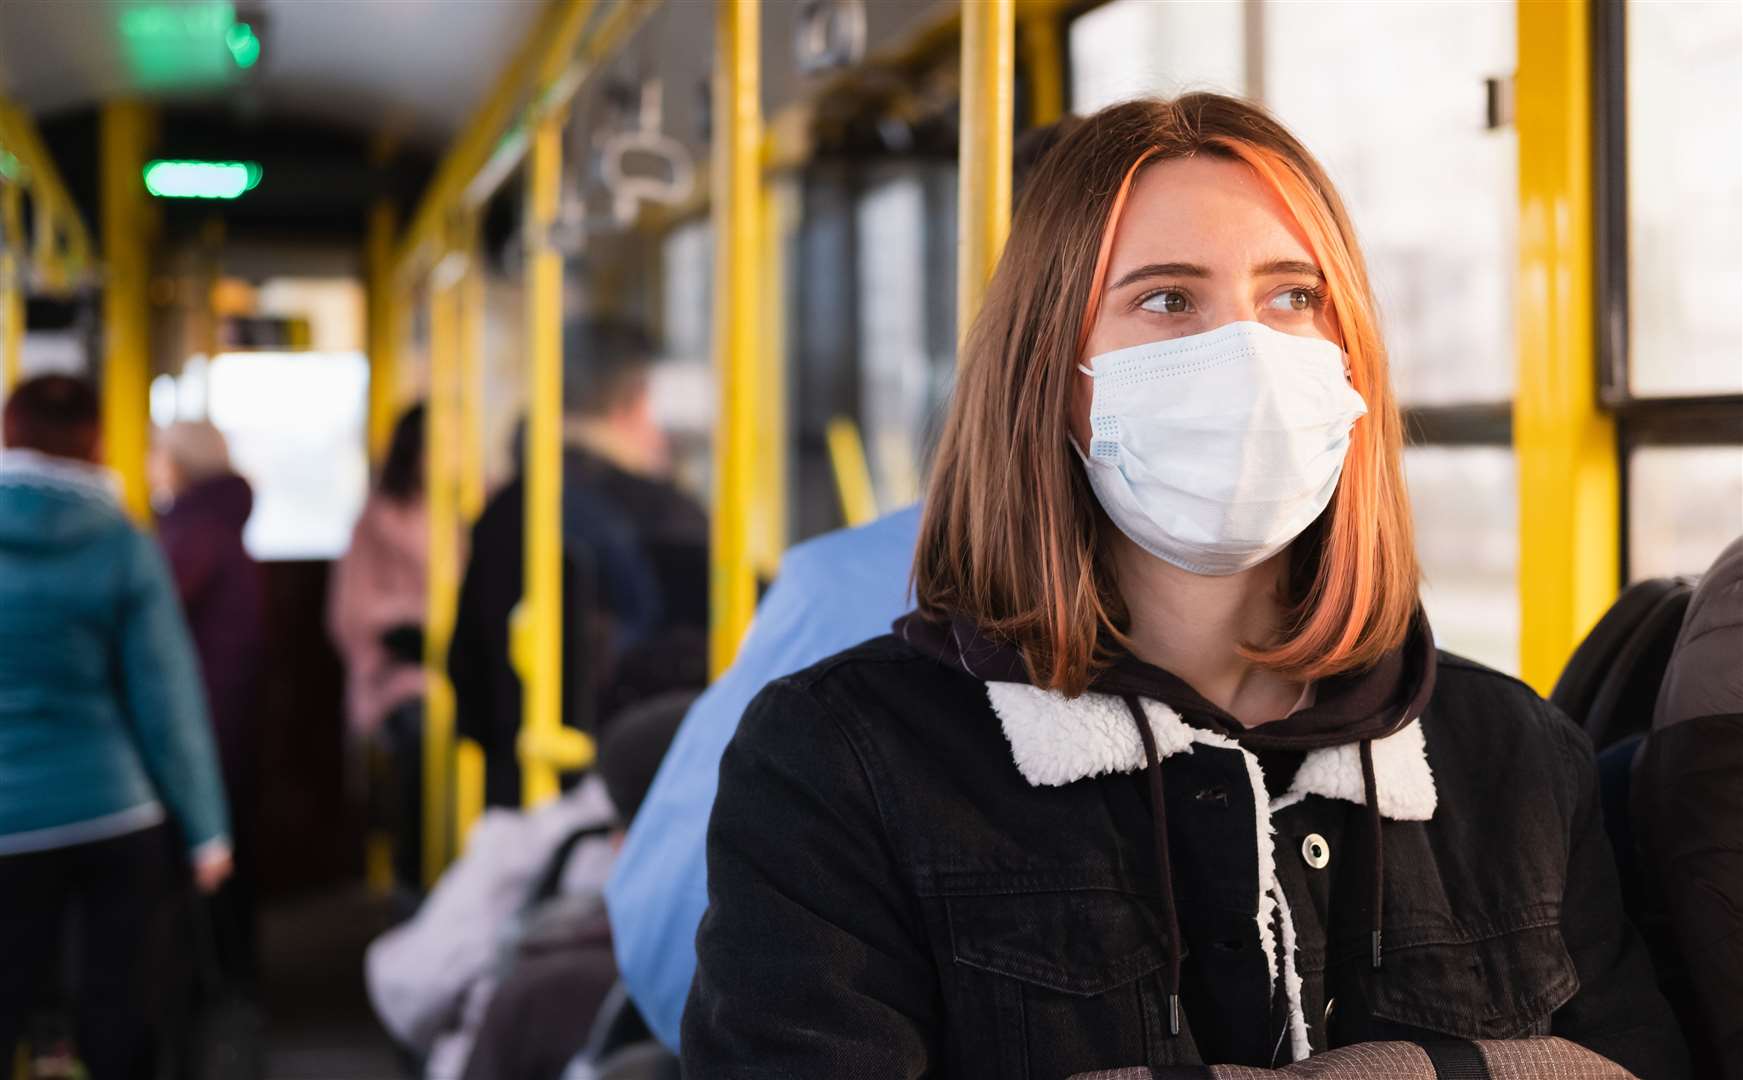 e Covid street marshals will be giving people advice on social distancing rules and reminding people to wear masks. Stock picture: istock